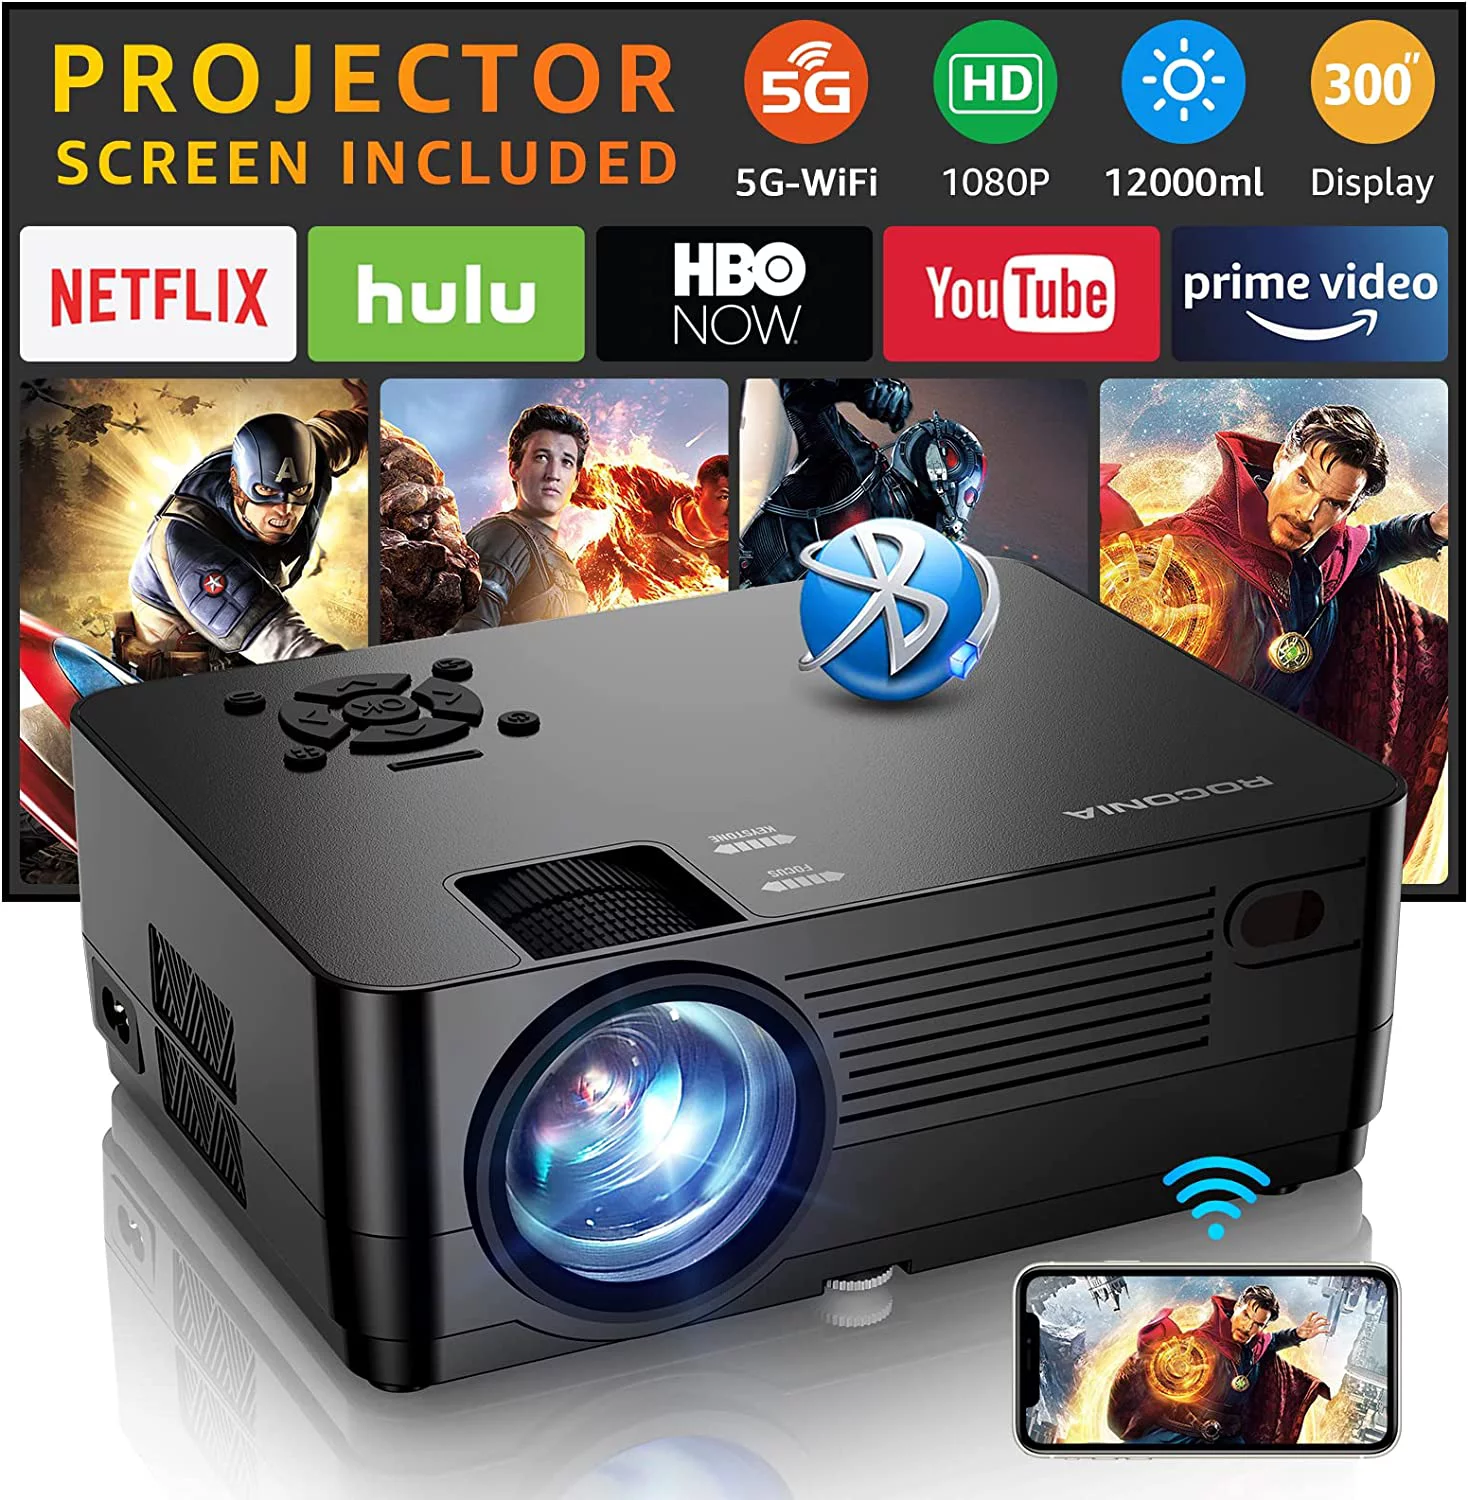 ROCONIA 5G WiFi Bluetooth Native 1080P Projector, 13000LM Full HD Movie Projector, LCD Technology 300" Display Support 4k Home Theater,(Projector Screen Included)